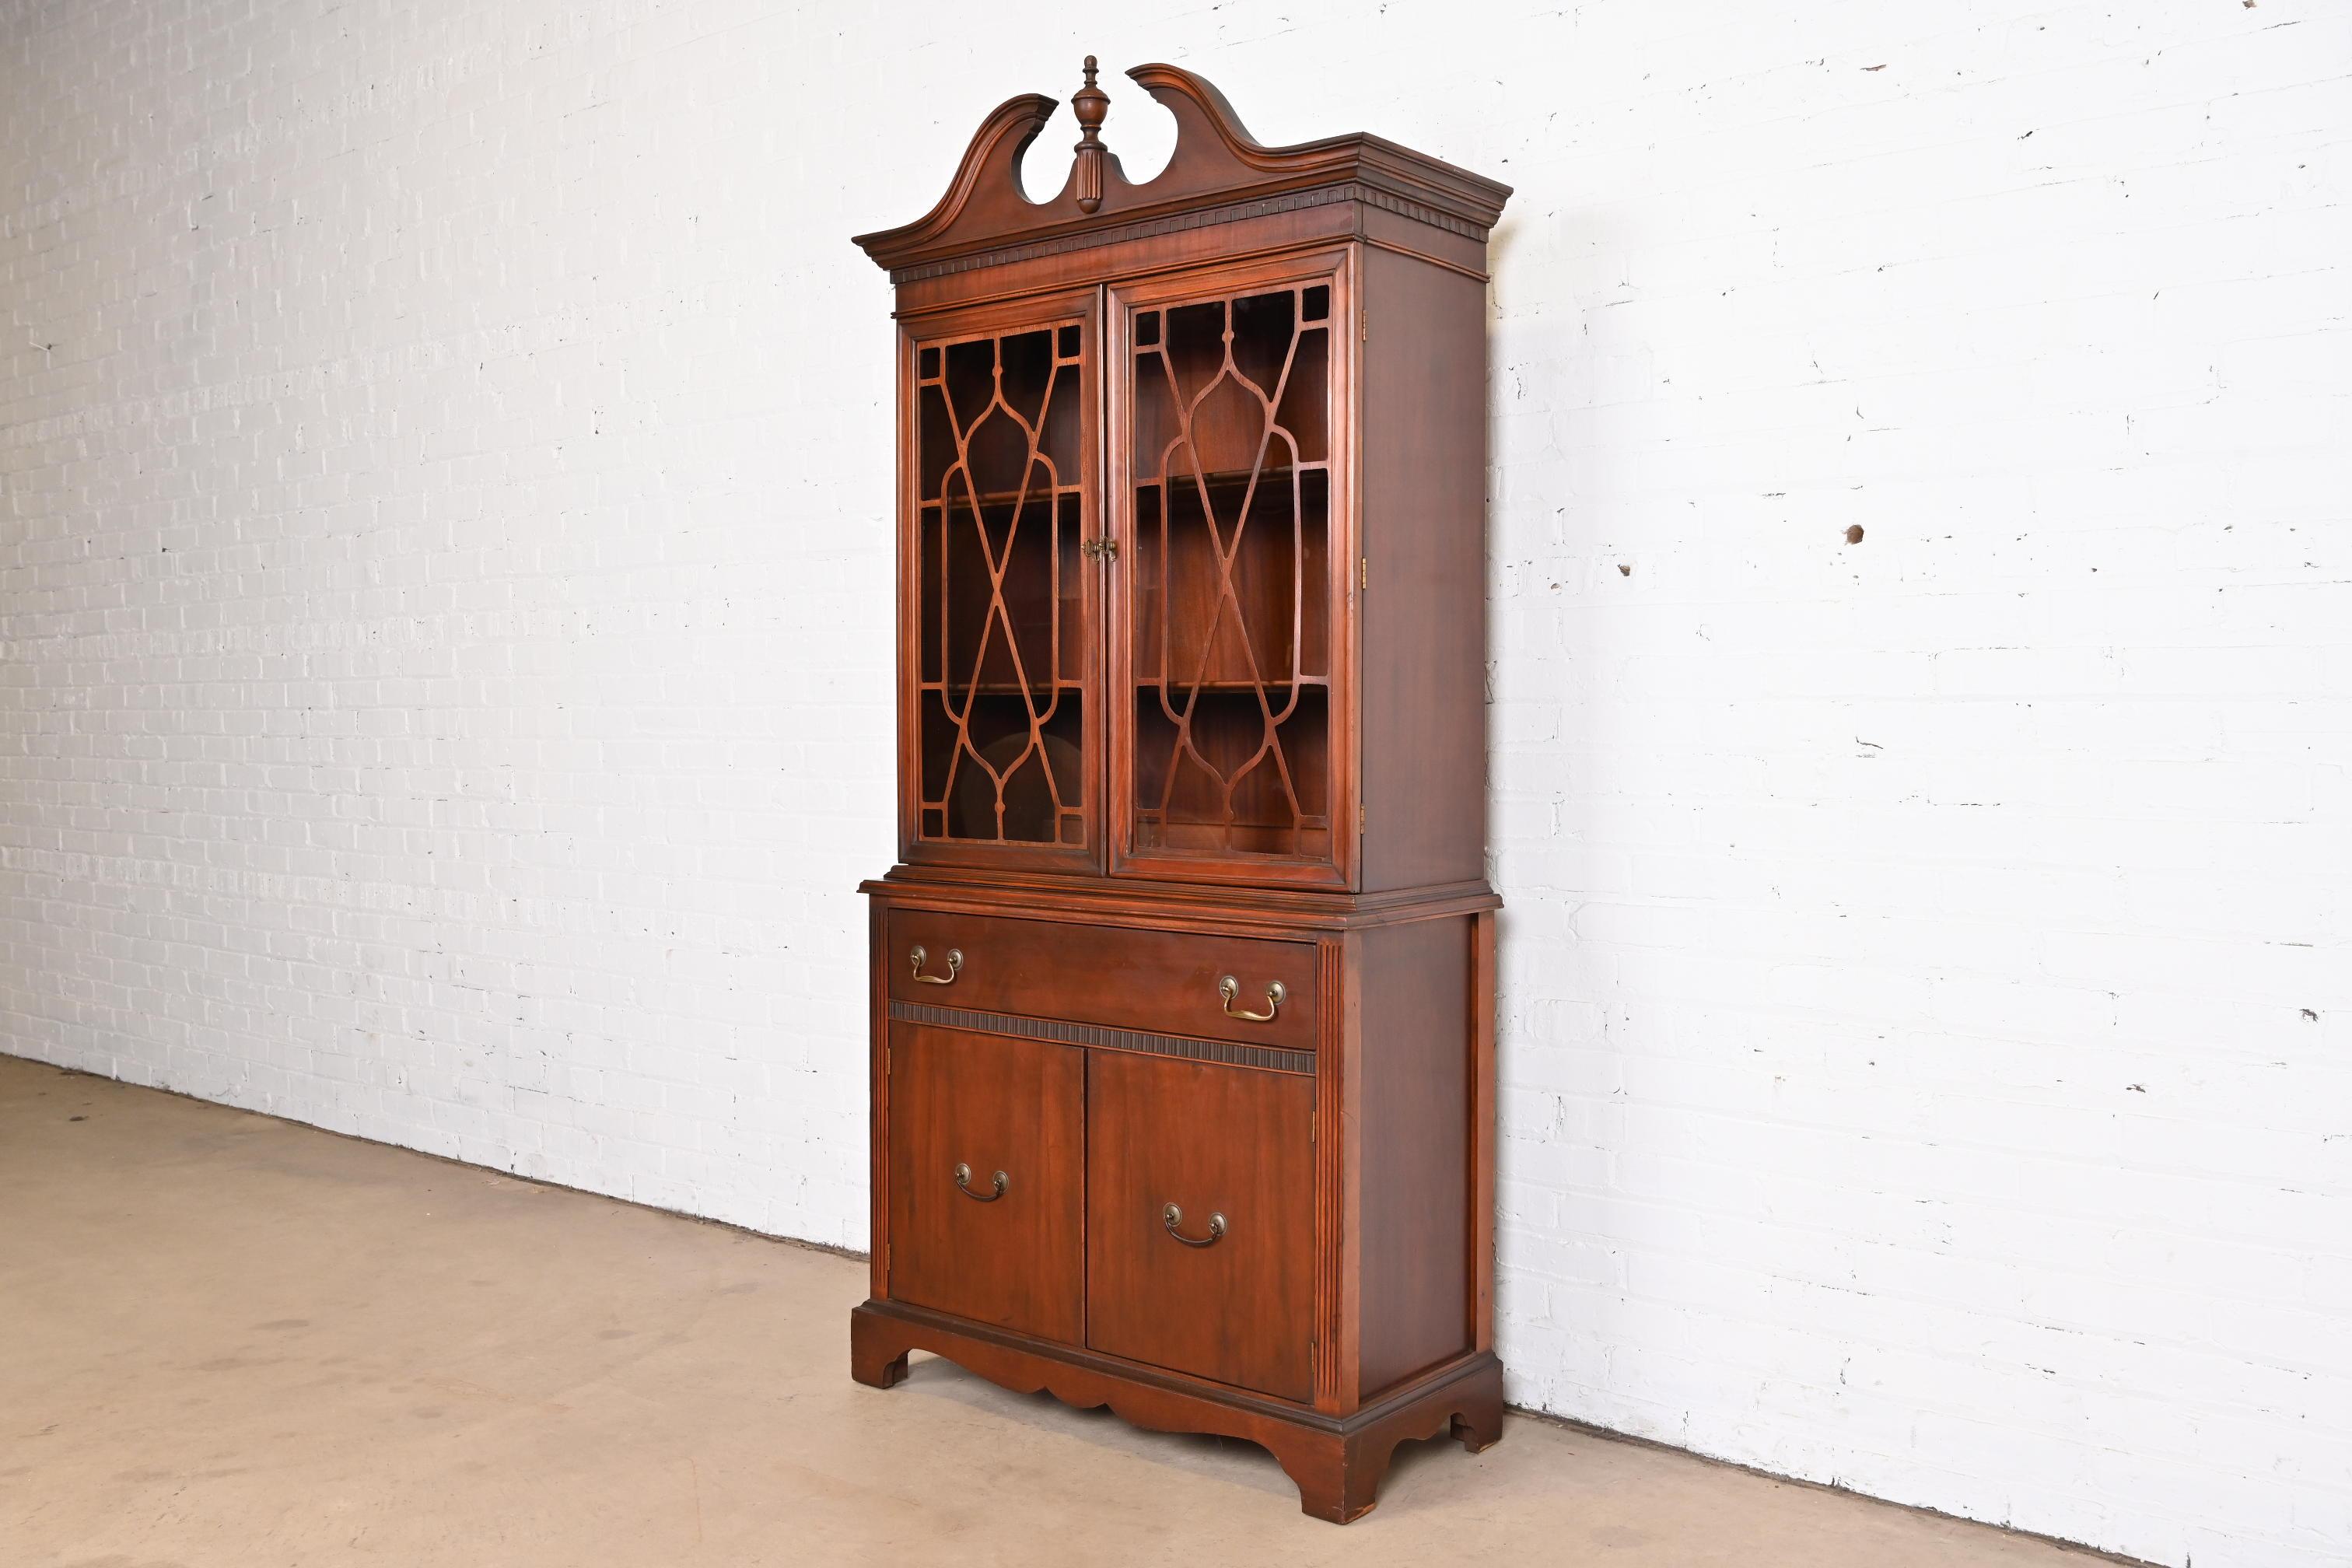 A gorgeous Georgian style breakfront bookcase cabinet

USA, Mid-20th Century

Carved mahogany, with mullioned glass front doors, and original brass hardware.

Measures: 36